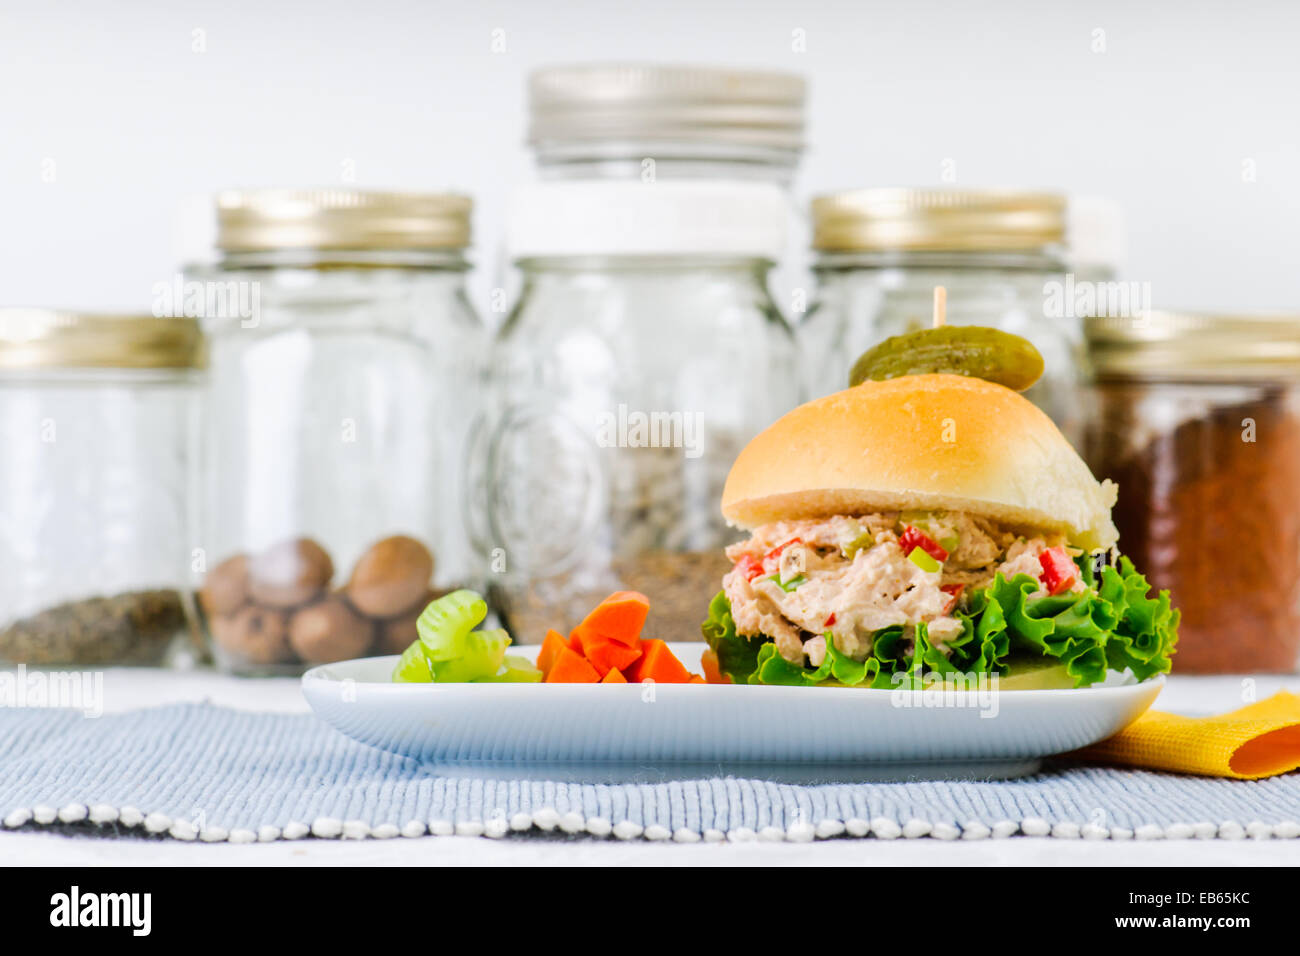 Tuna salad sandwich with lettuce on a homemade bun with healthy carrot and celery sticks and a pickle Stock Photo